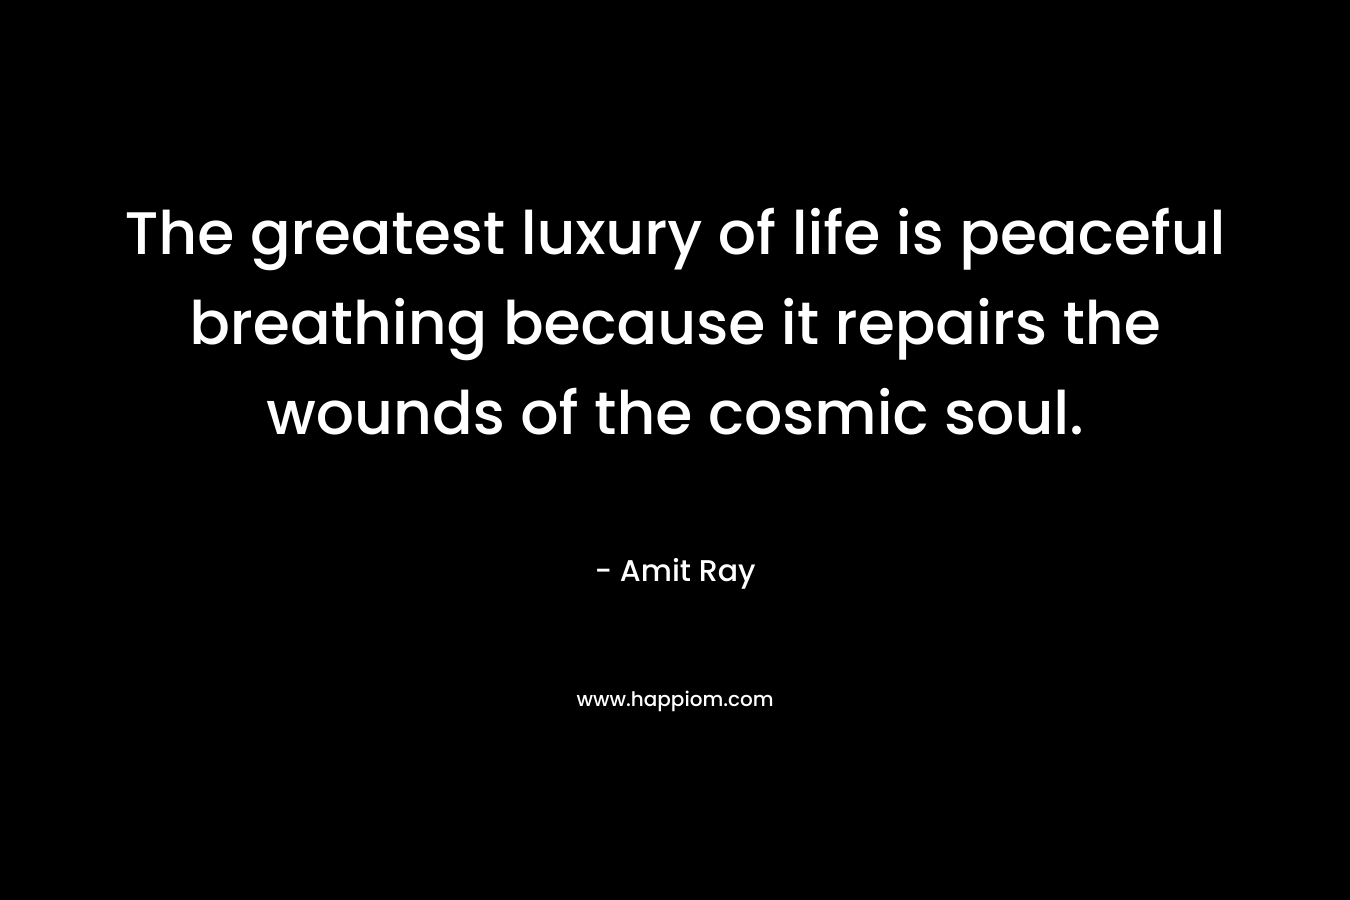 The greatest luxury of life is peaceful breathing because it repairs the wounds of the cosmic soul.